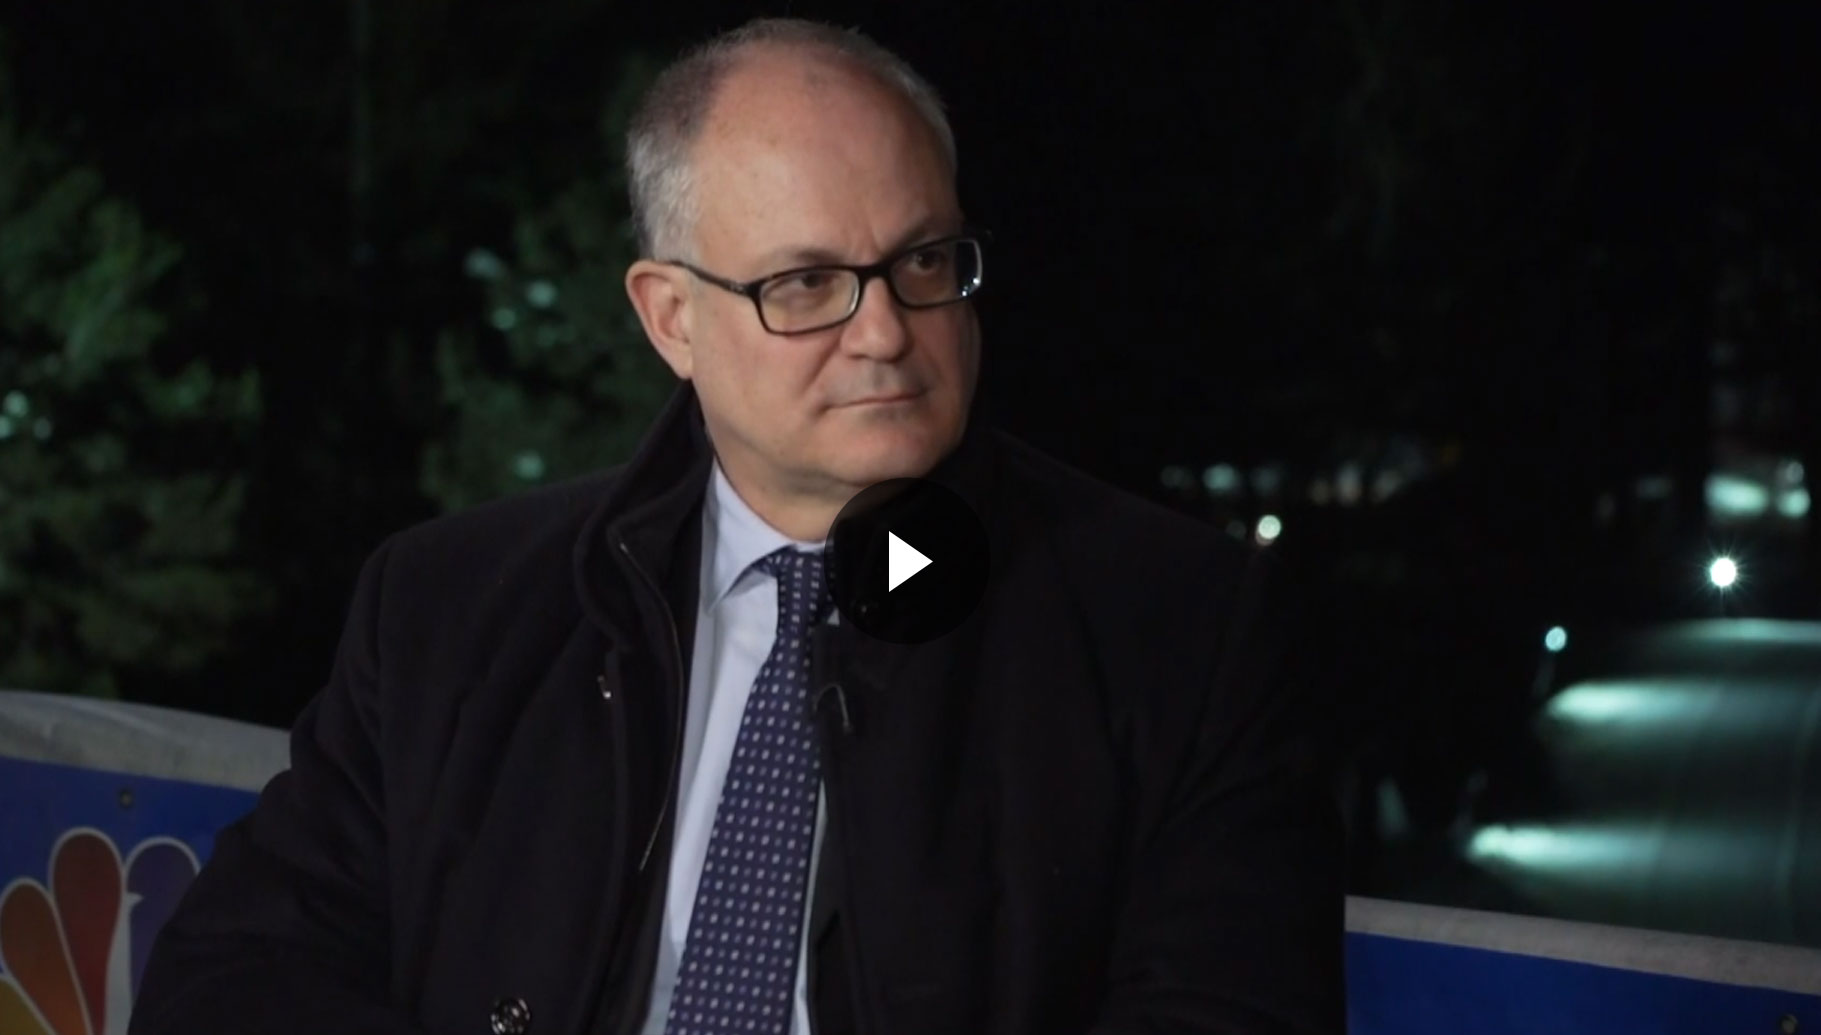 Roberto Gualtieri’s interview with CNBC on the sidelines of the World Economic Forum in Davos